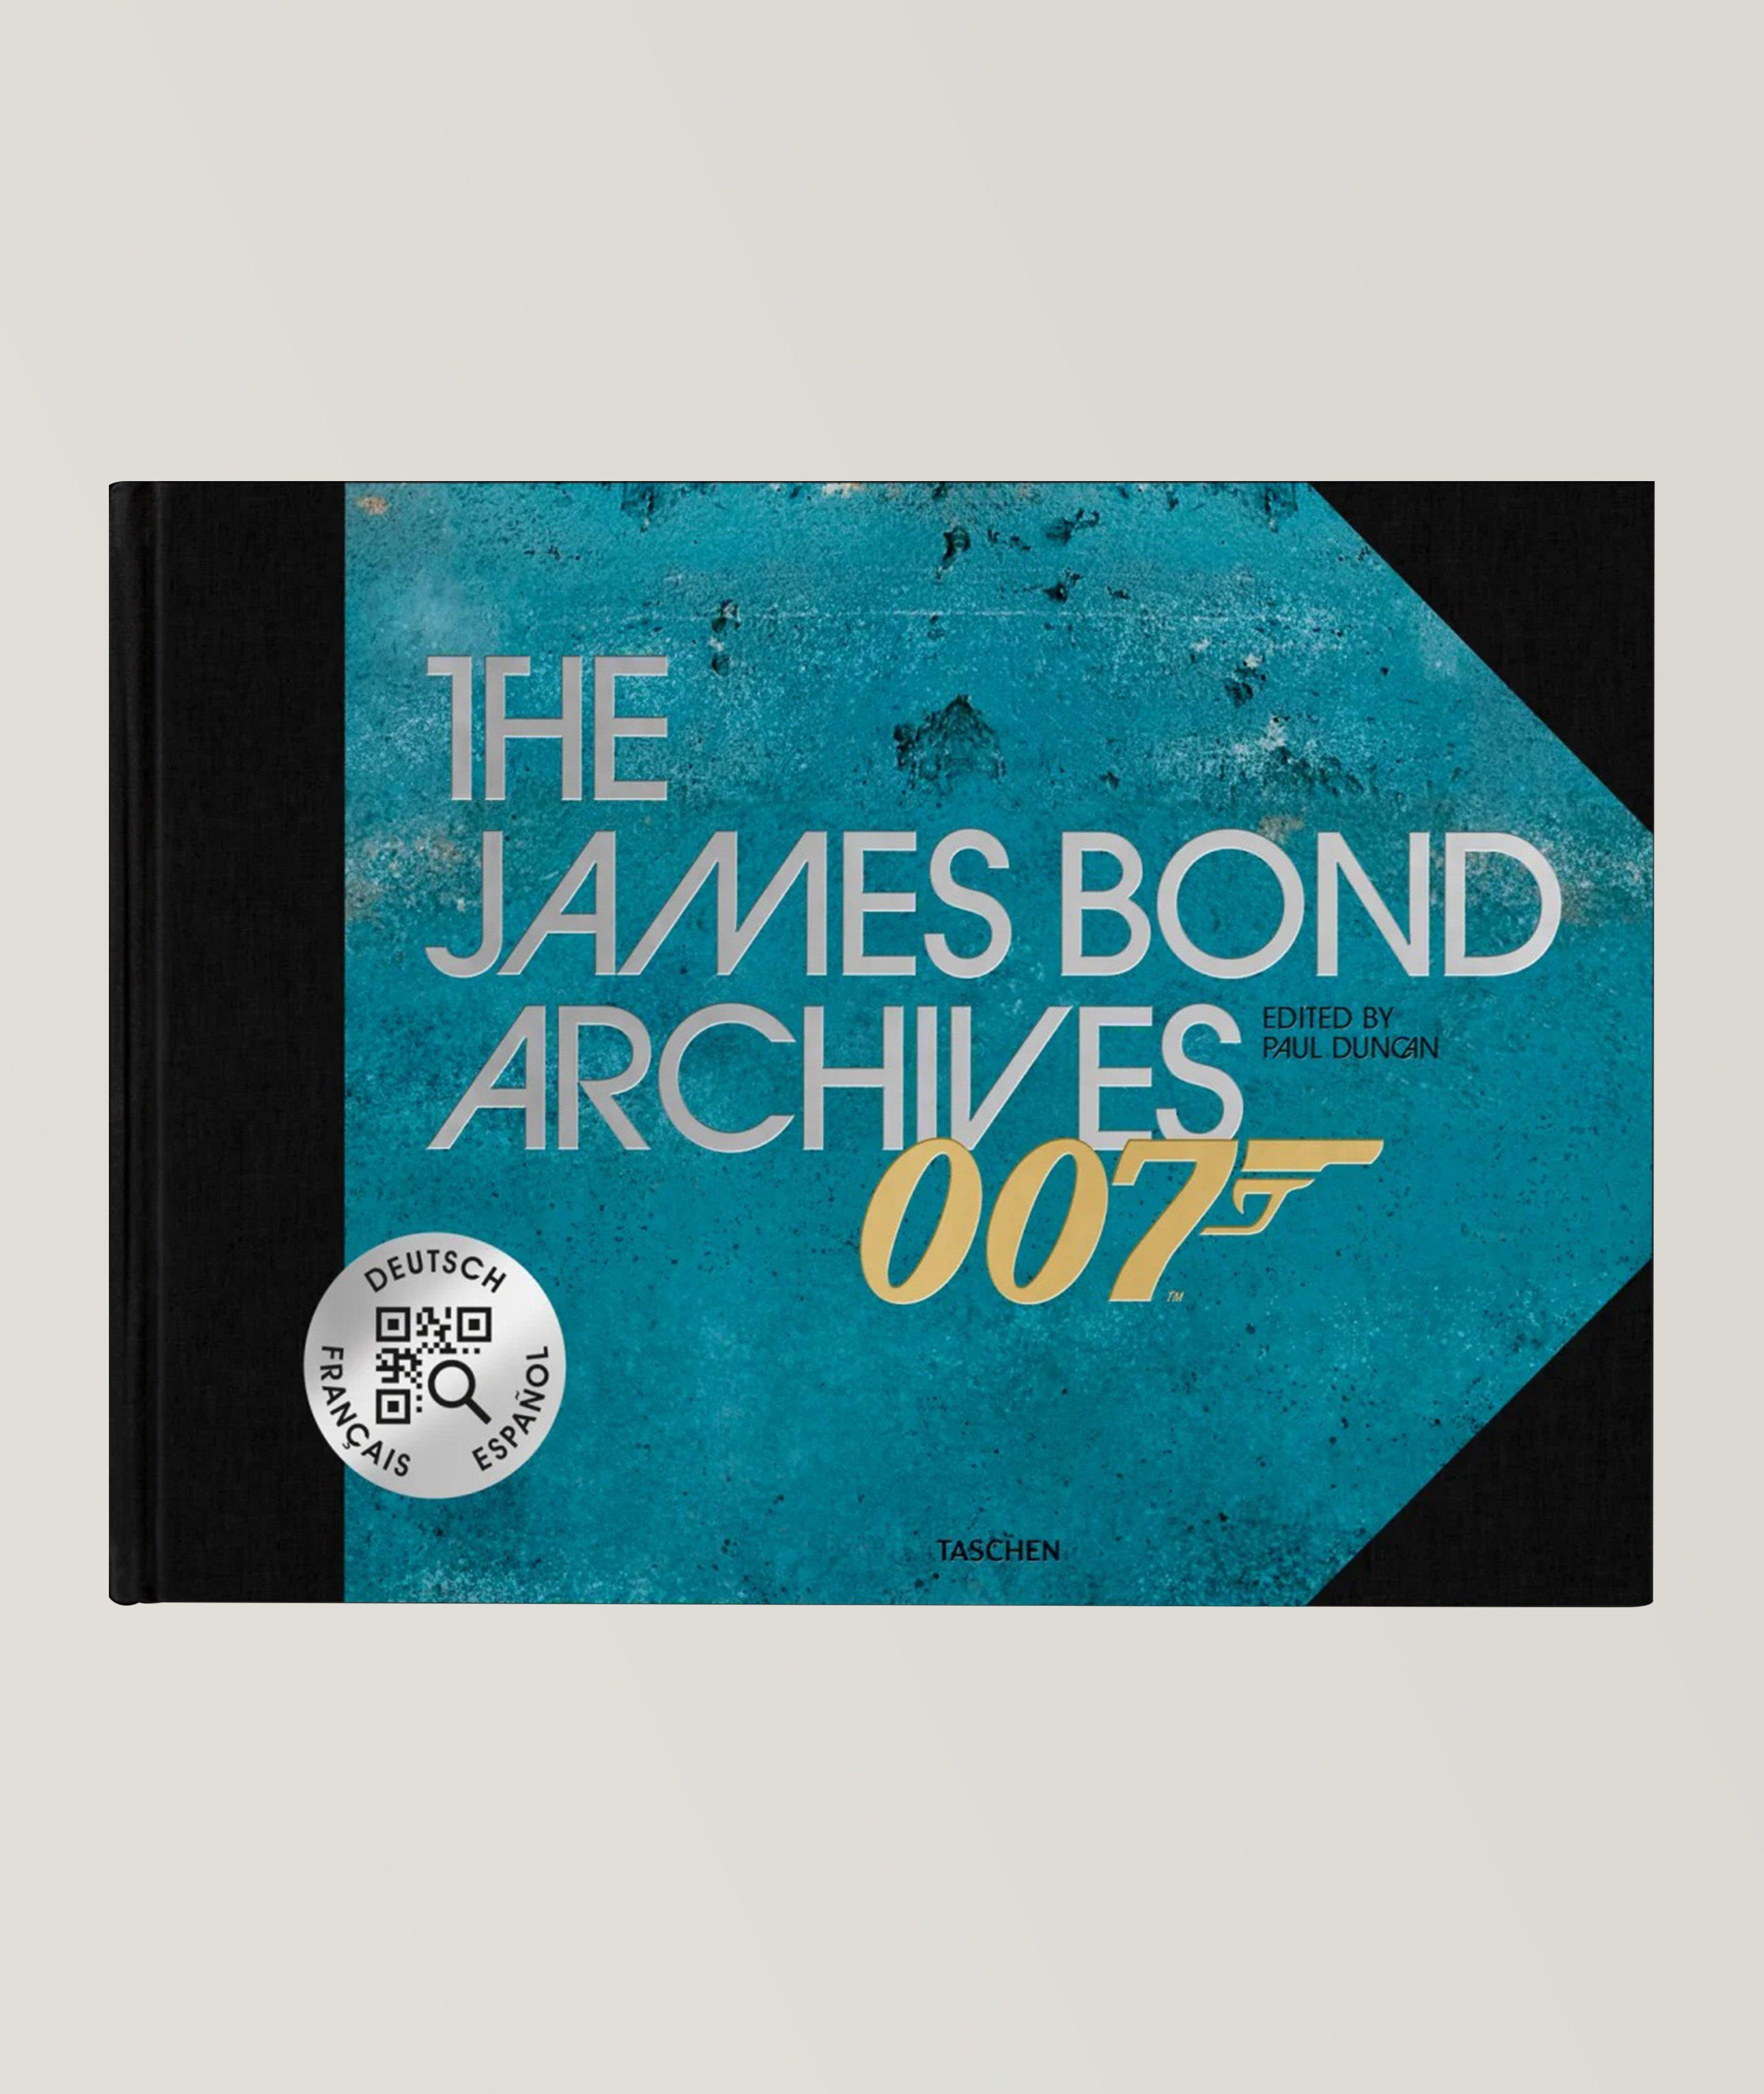 The James Bond Archives, “No Time To Die” Edition